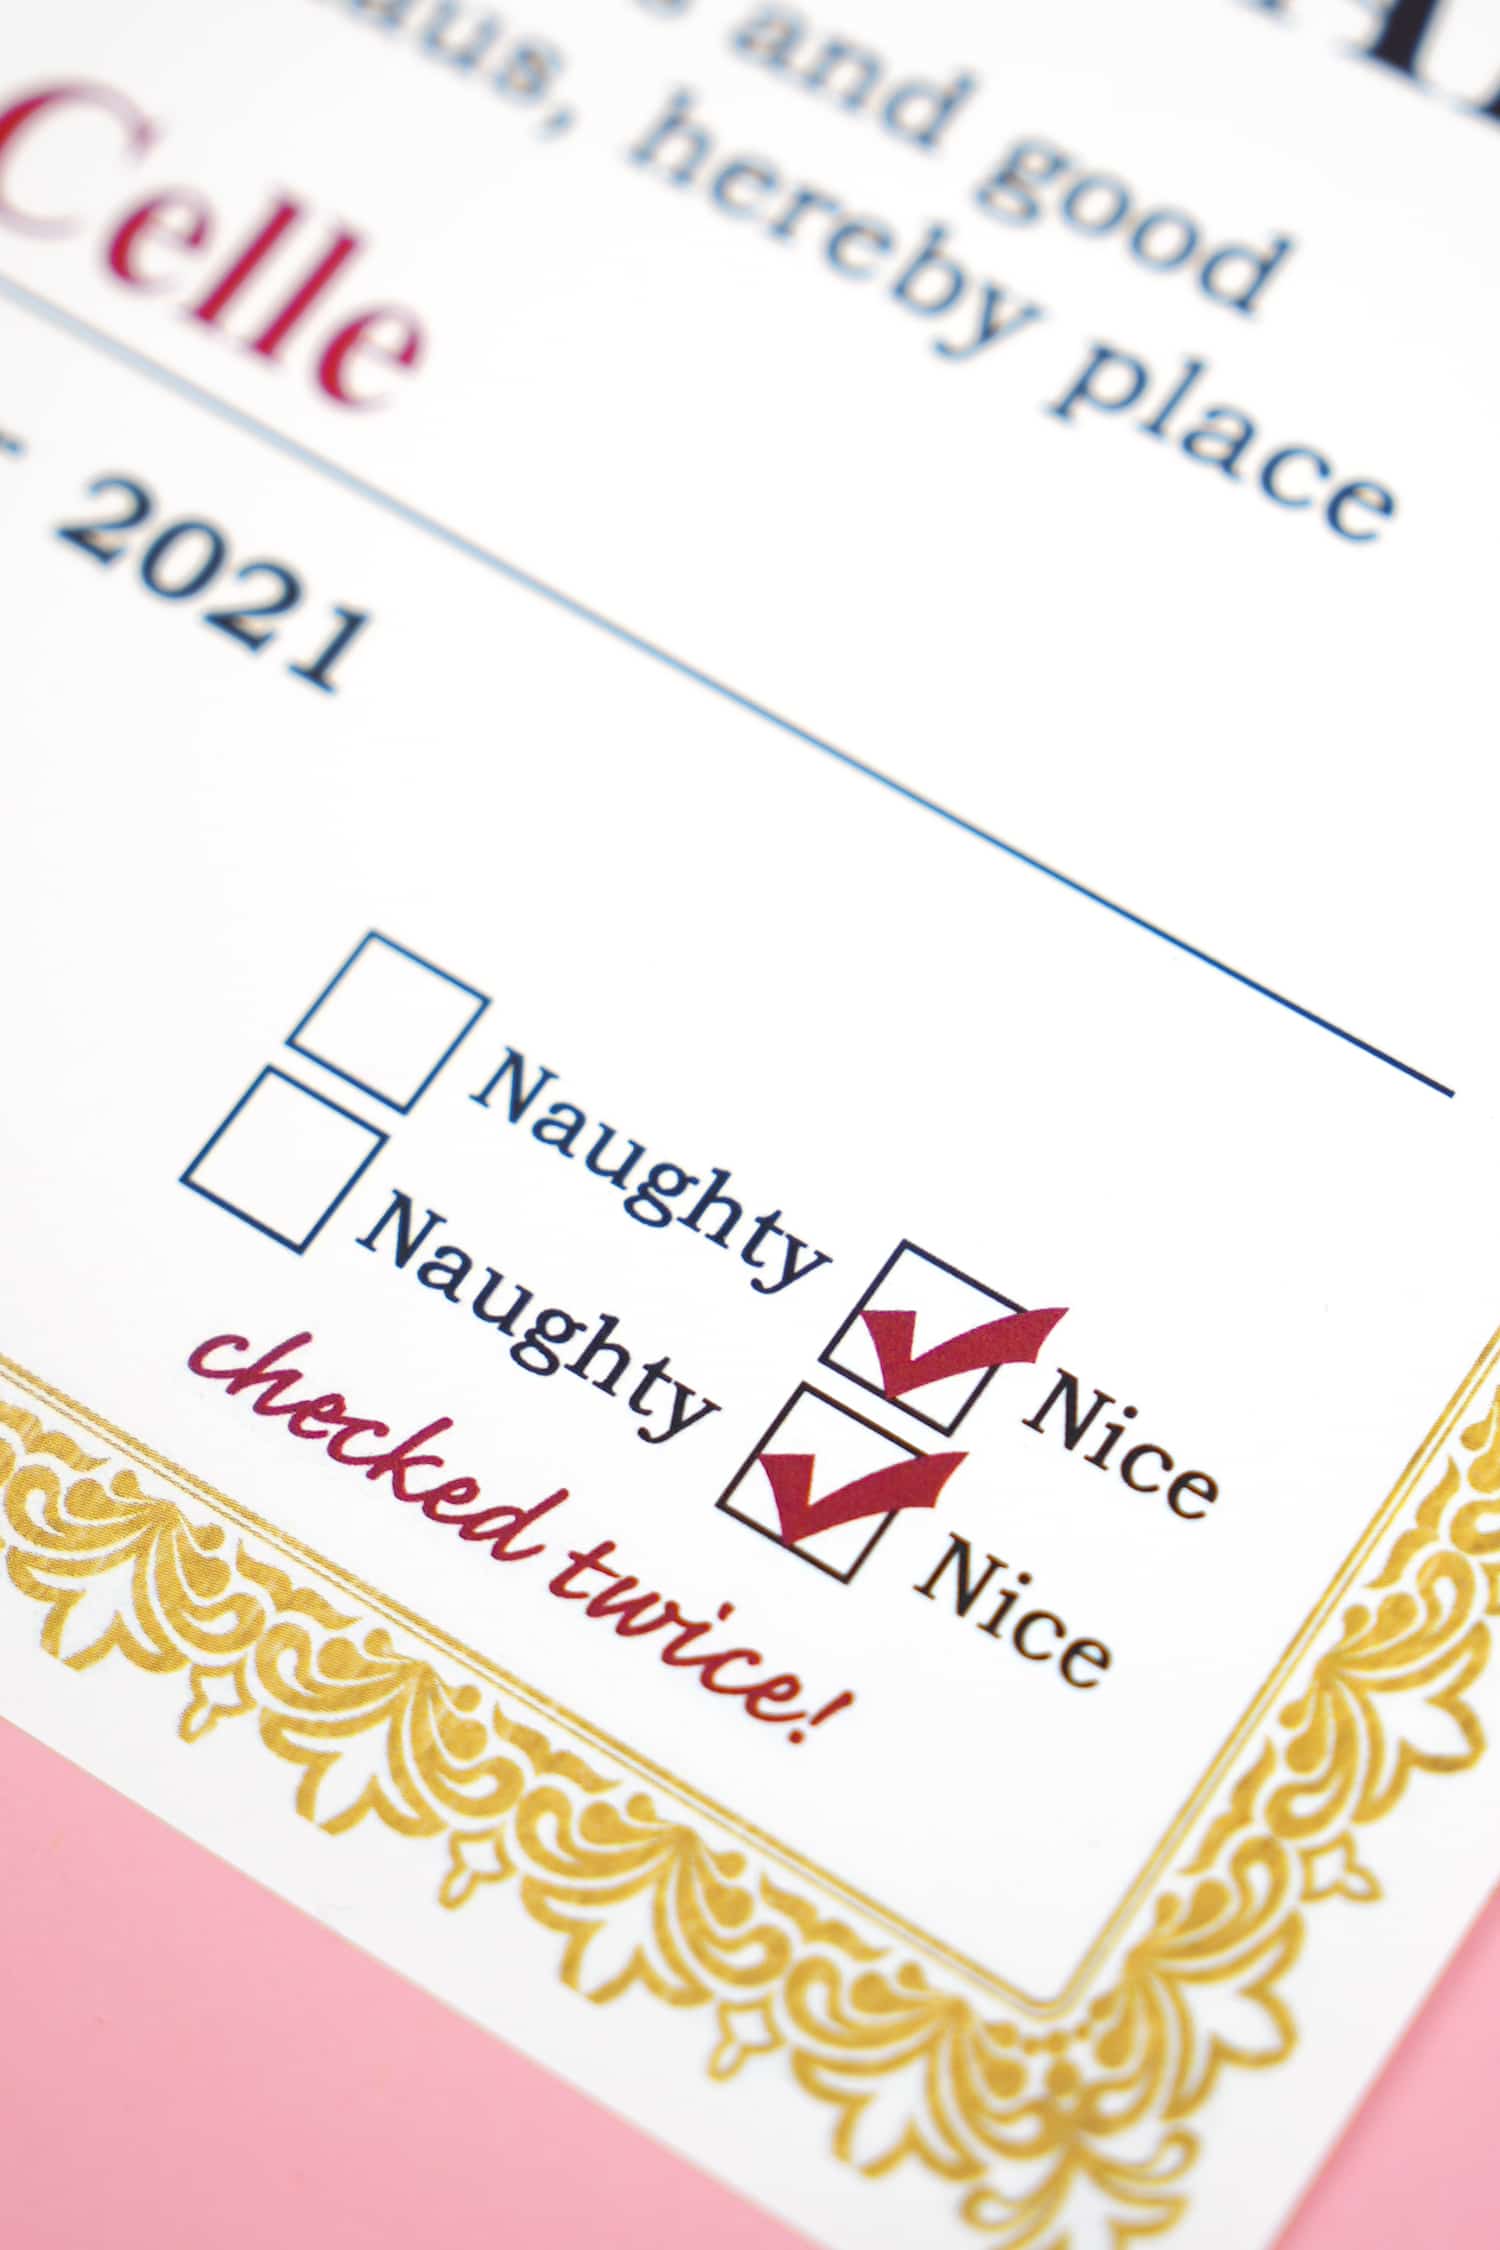 Close up of Santa's Nice list printable certificate with "Checked Twice" and two "Nice" checkboxes marked off